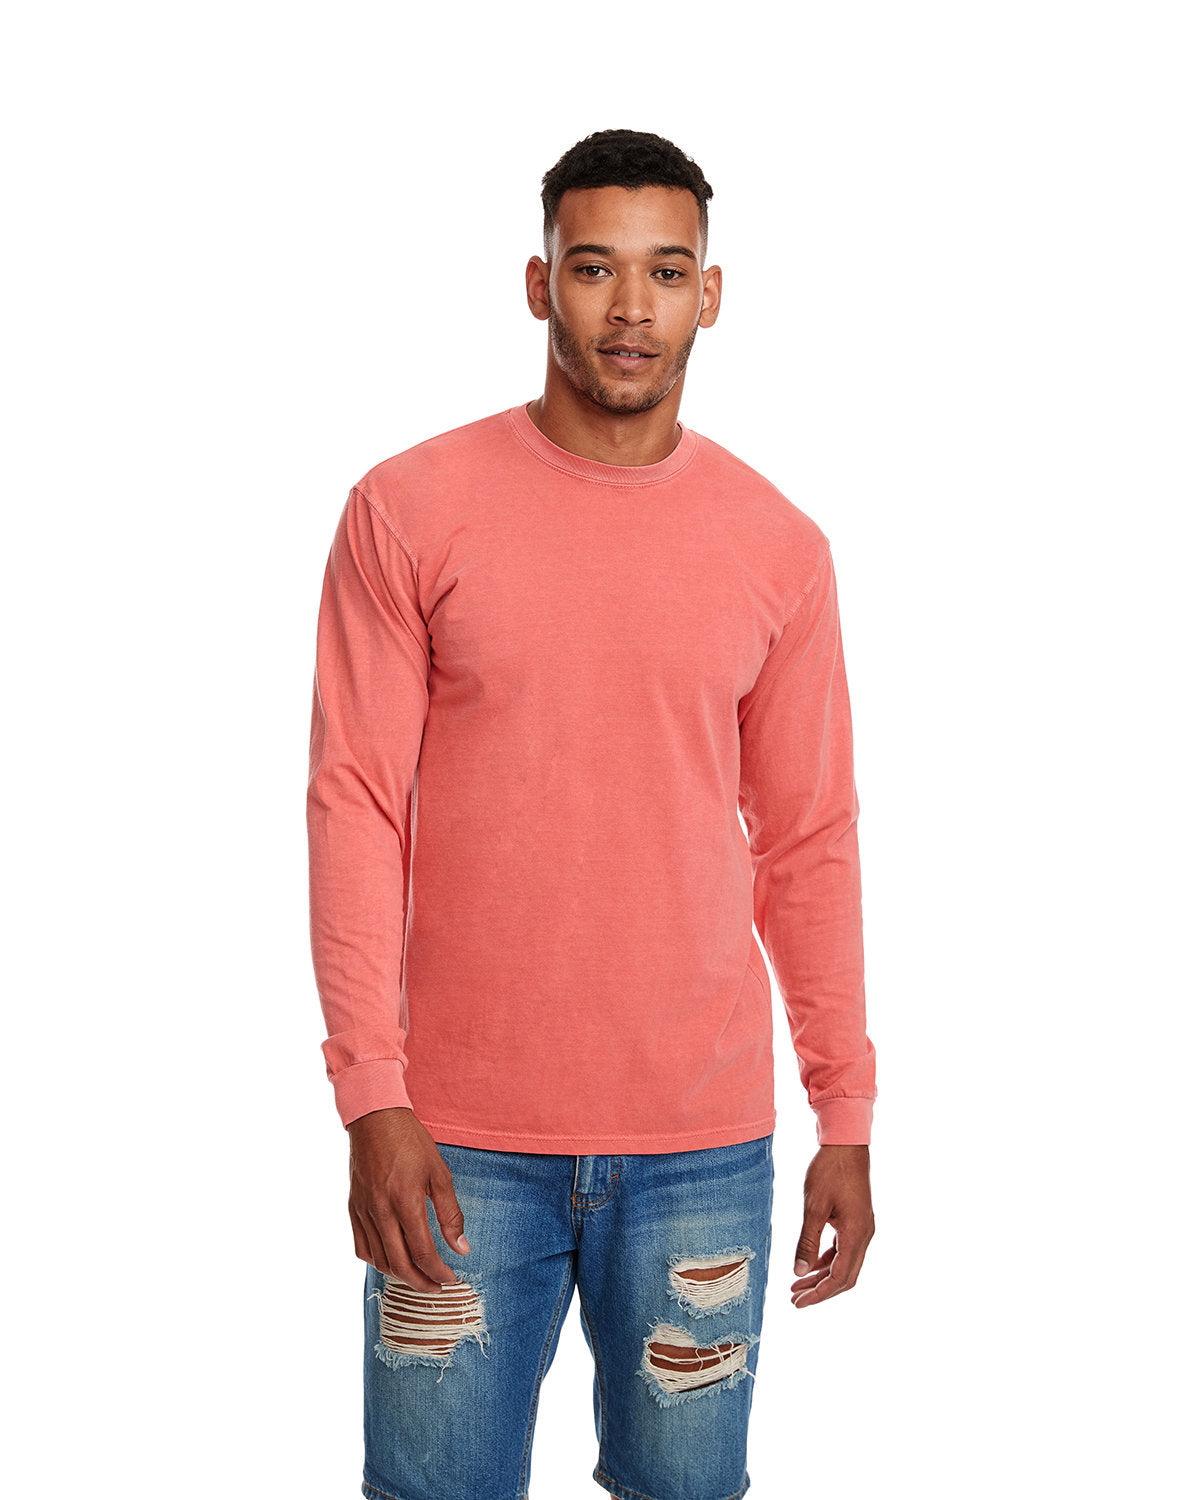 Adult Inspired Dye Long-Sleeve Crew with Pocket - Apparel Globe